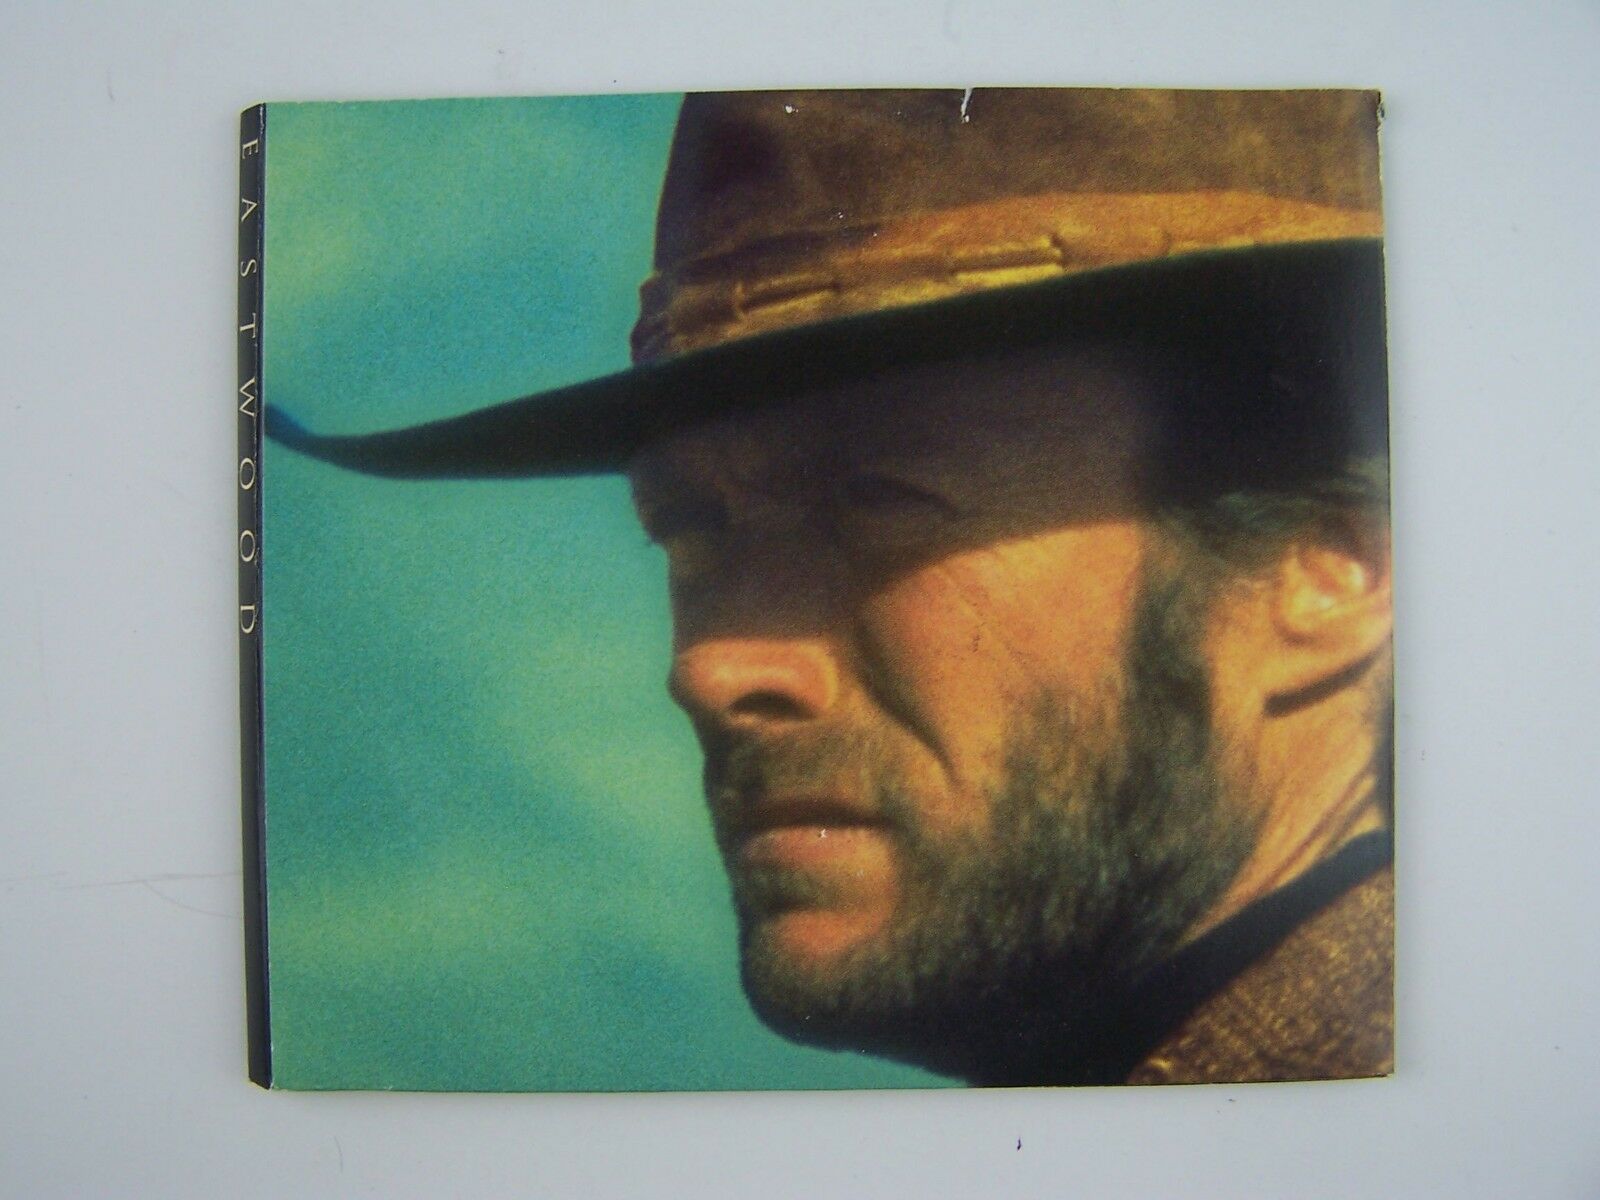 Primary image for Clint EASTWOOD 2xCD PC Game Documentary Biography by Starwave Corp